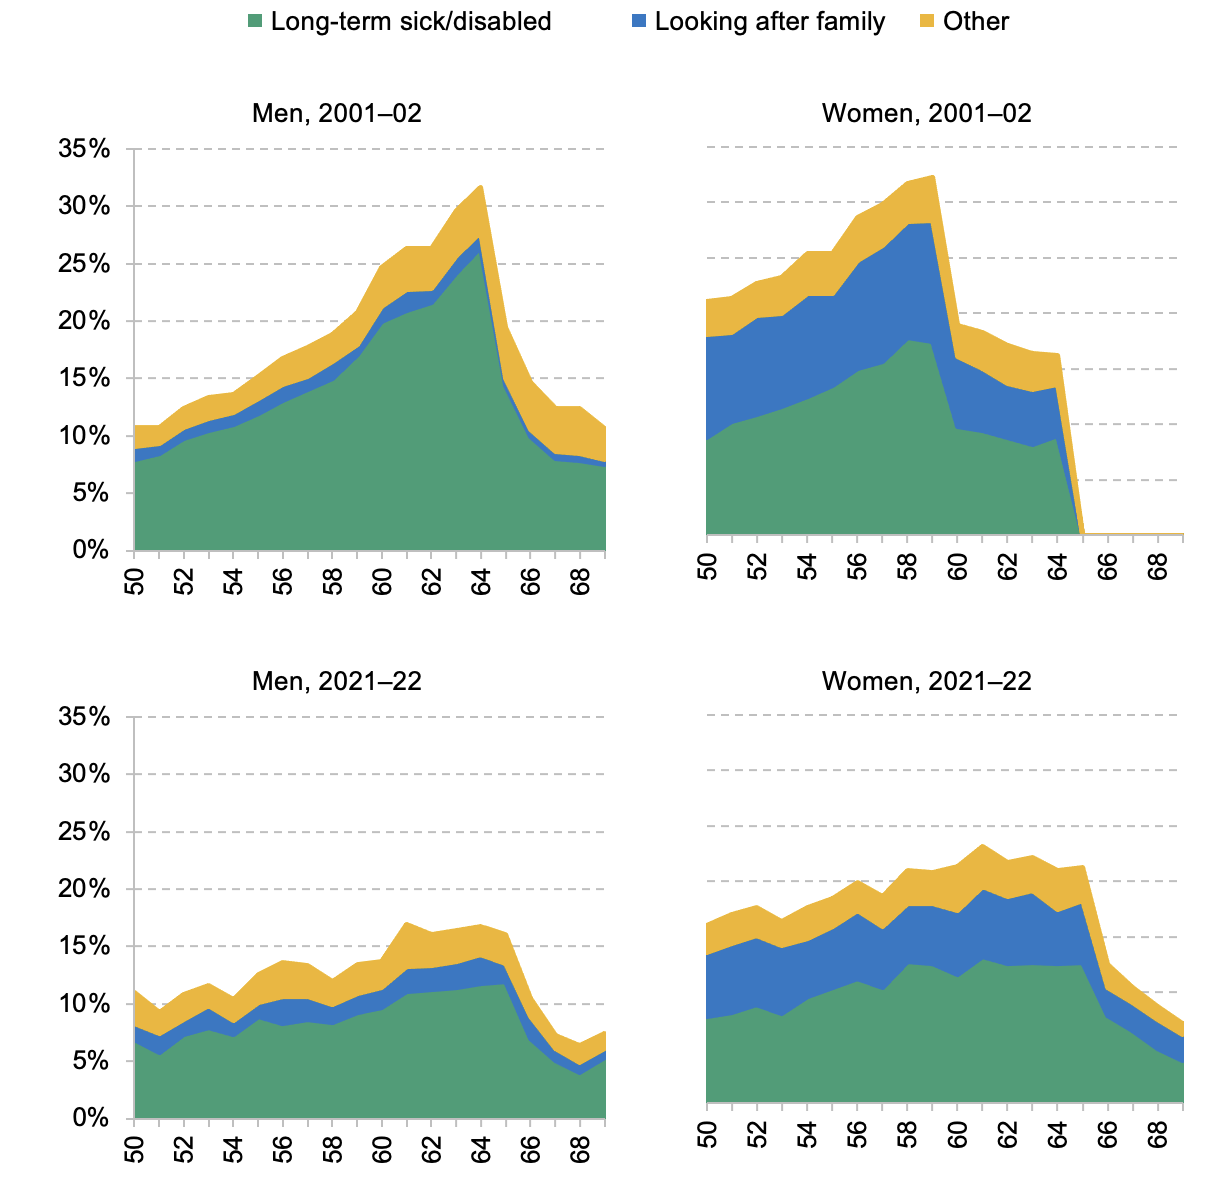 Stated reasons for being economically inactive but not retired, aged 50–69, percentage of the population by age and sex, 2001–02 and 2021–22